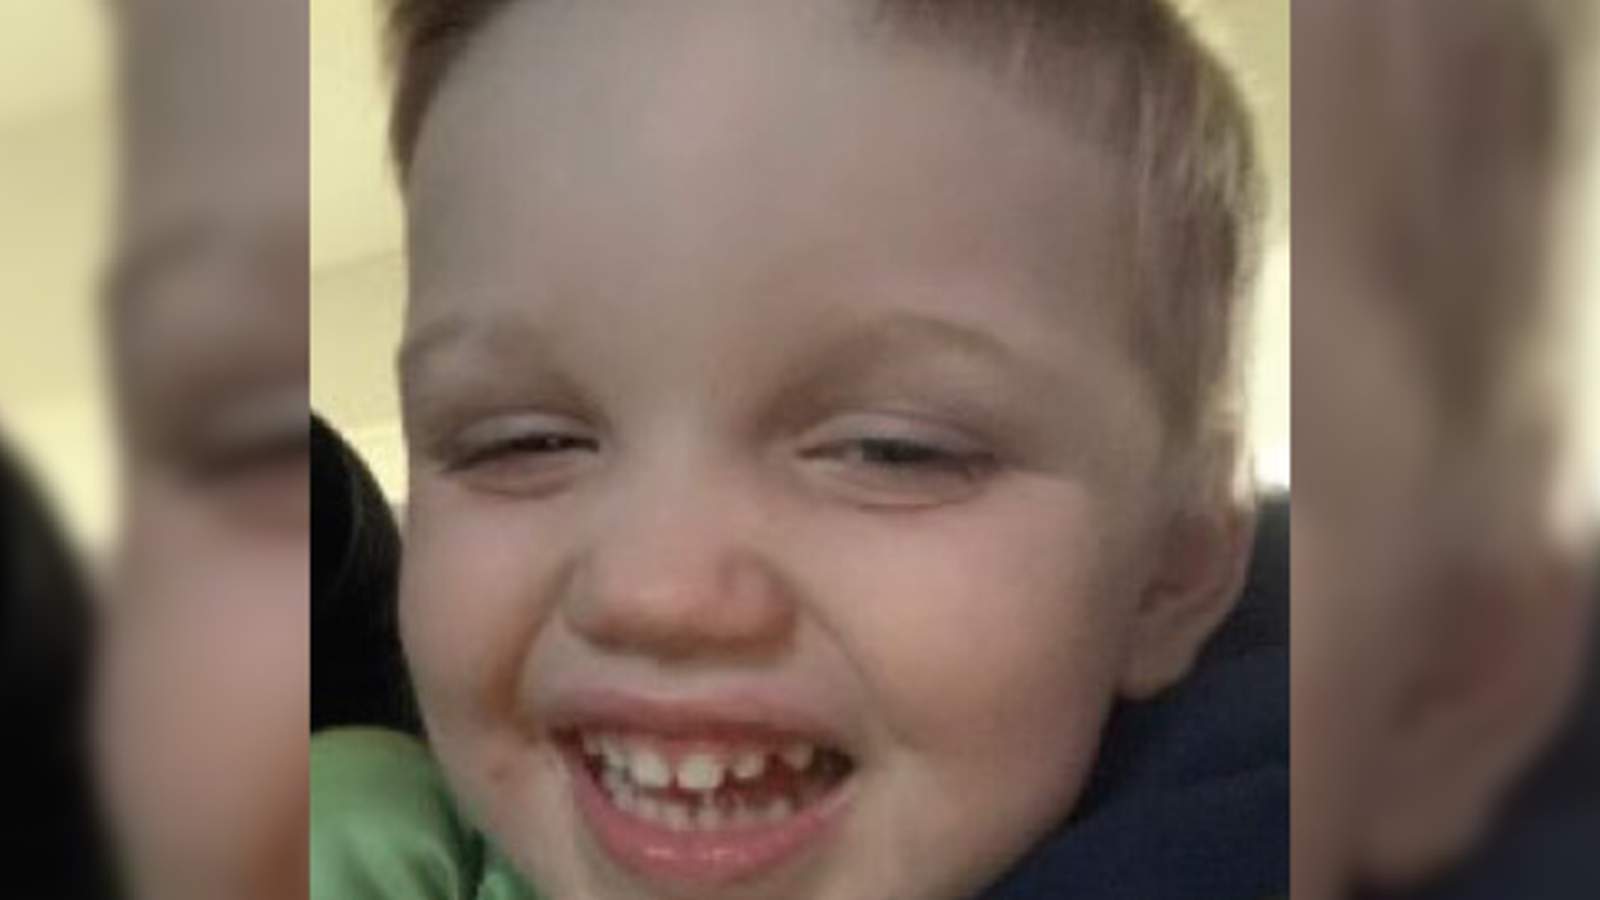 UPDATE: AMBER Alert discontinued for 2-year-old boy from Celina